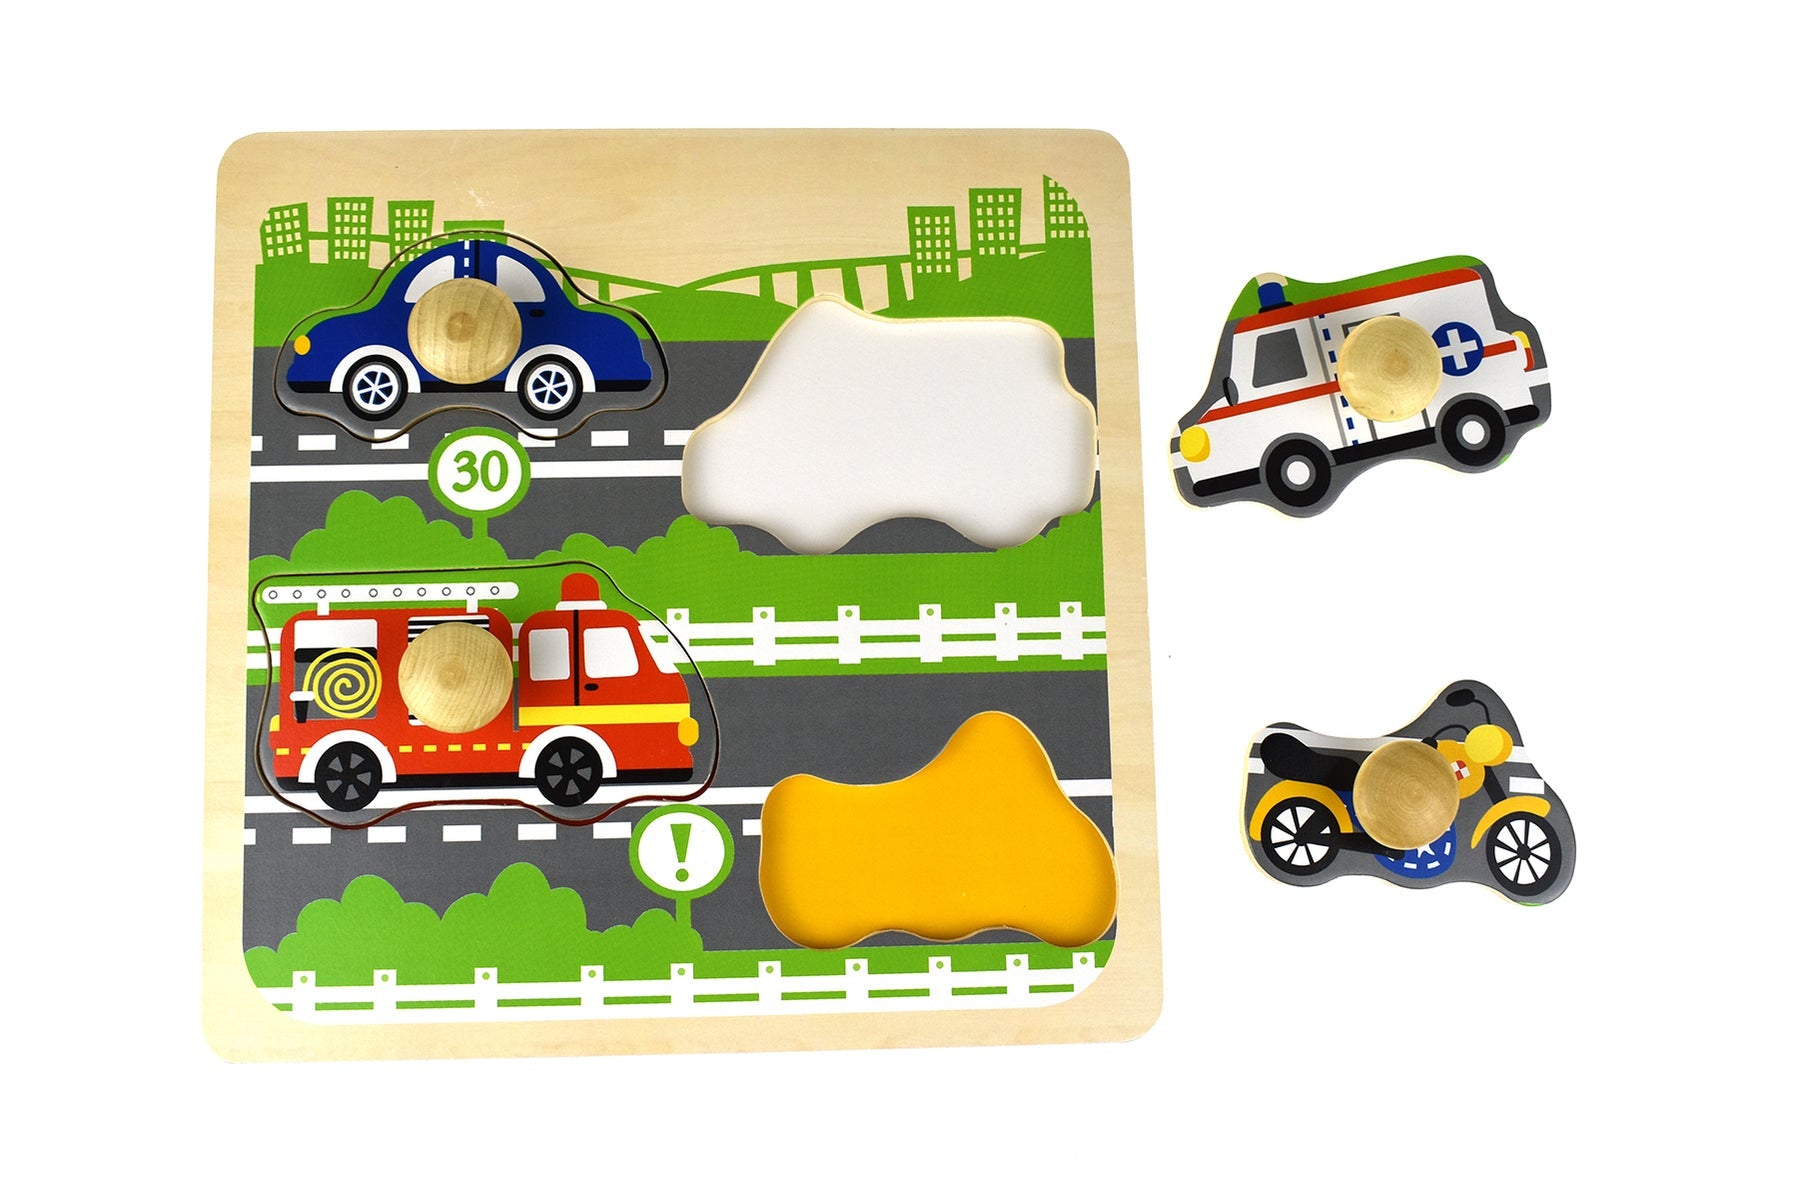 Buy Traffic Large Peg Puzzle - bright colors, 4 pieces, wooden knobs, improves skills, fun and educational